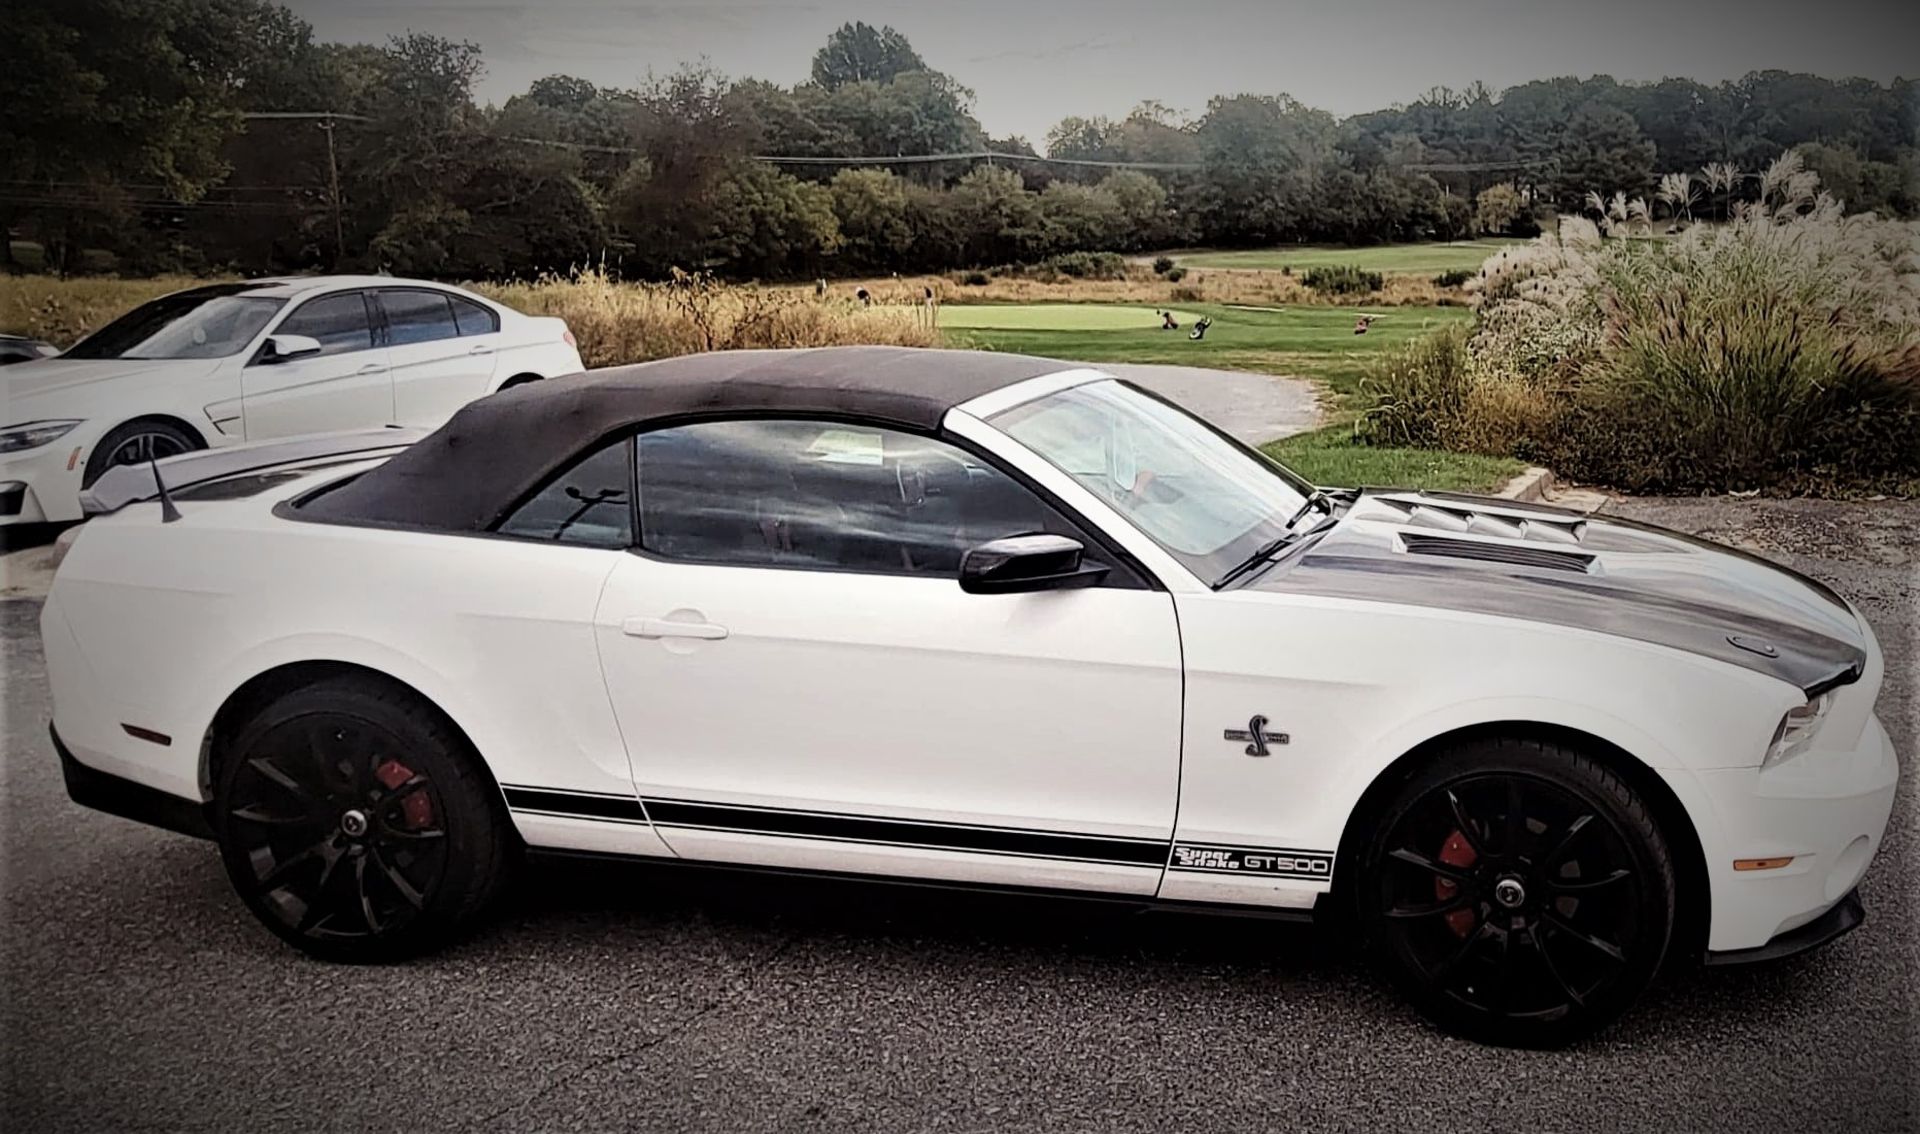 2010 Ford Mustang Custom GT500 Tribute Convertible - Image 2 of 12